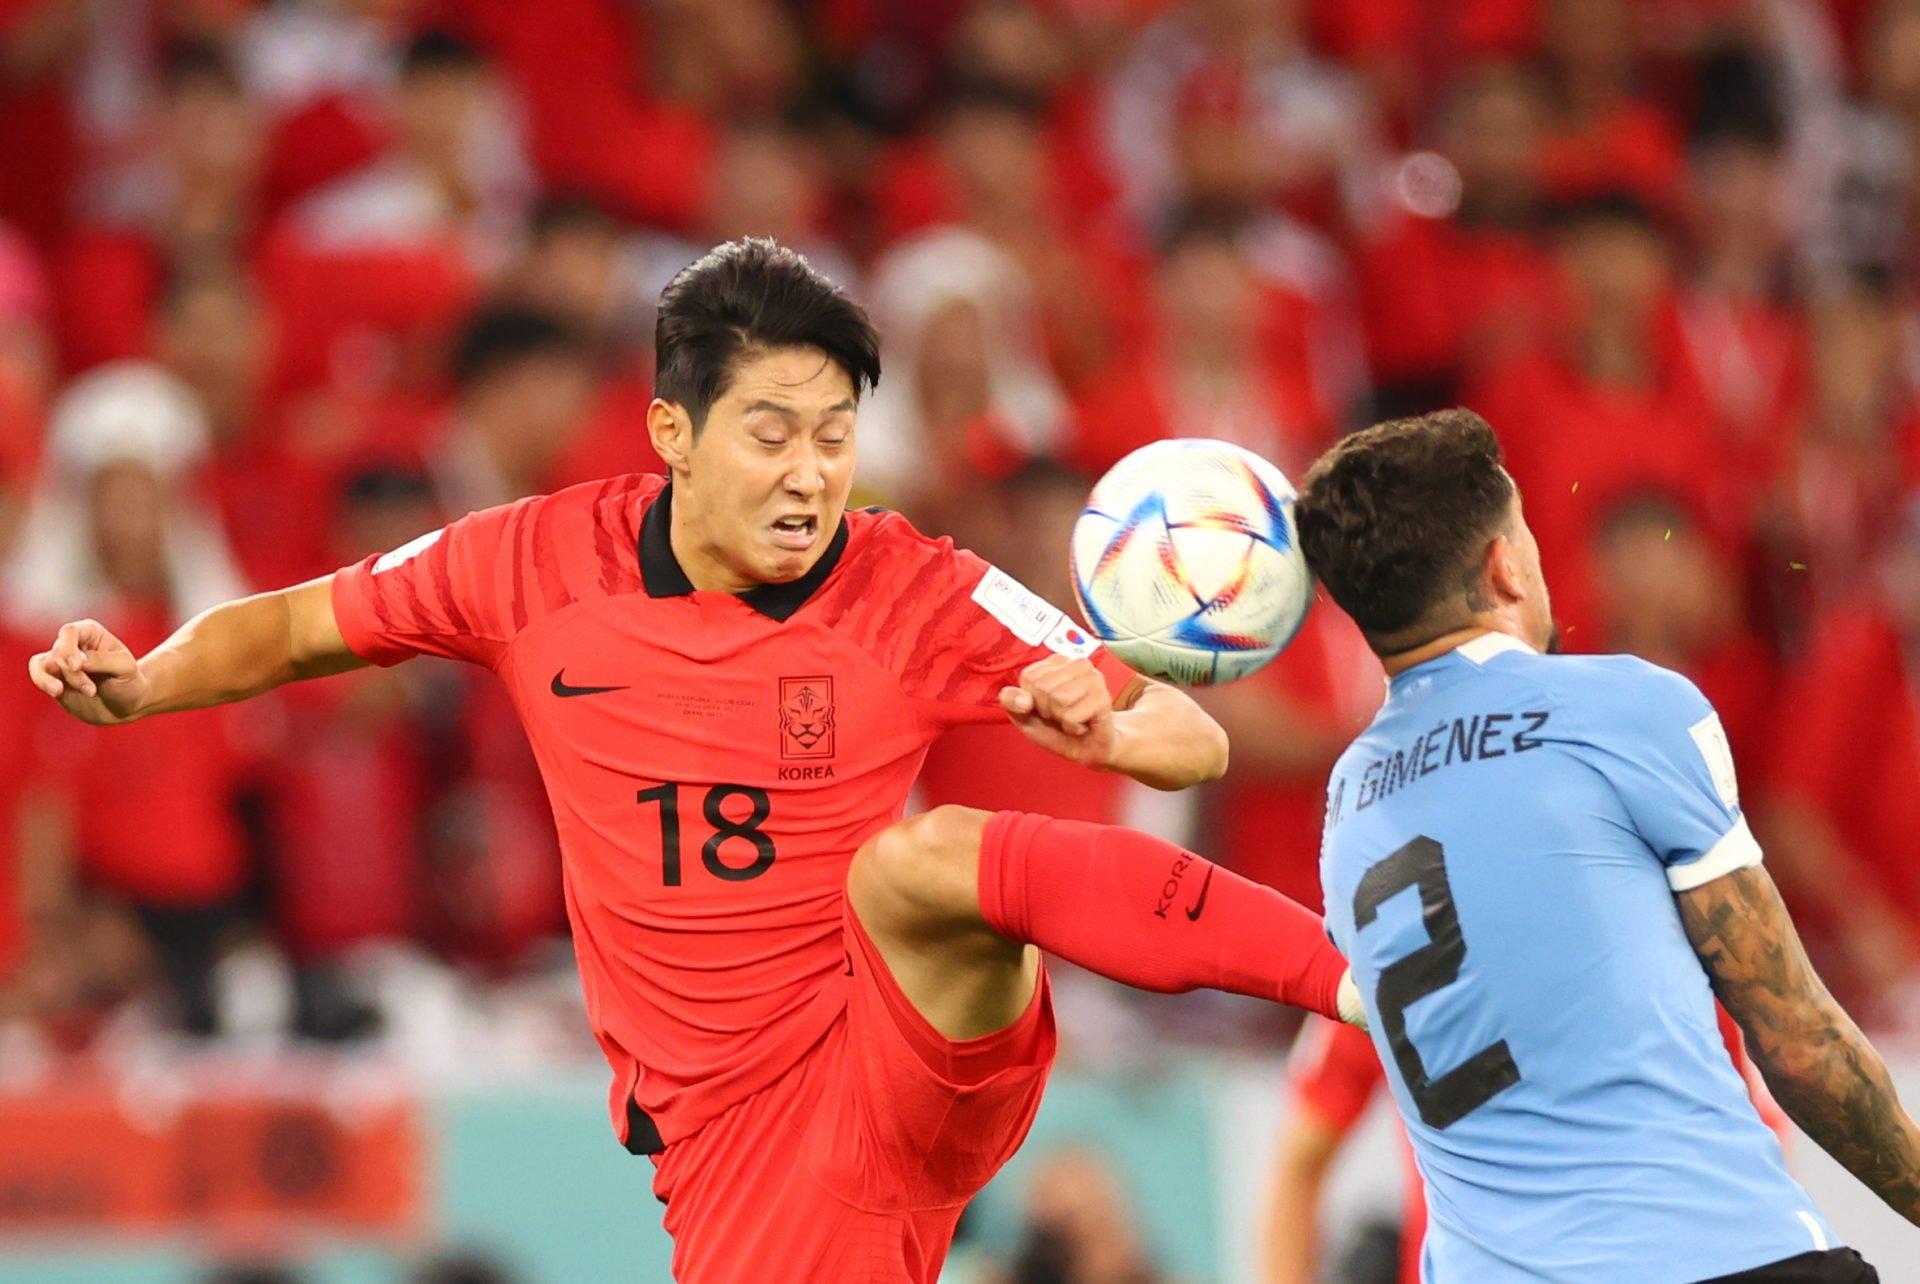 Wolves transfer news: Wanderers ask about South Korea star Kang-in Lee